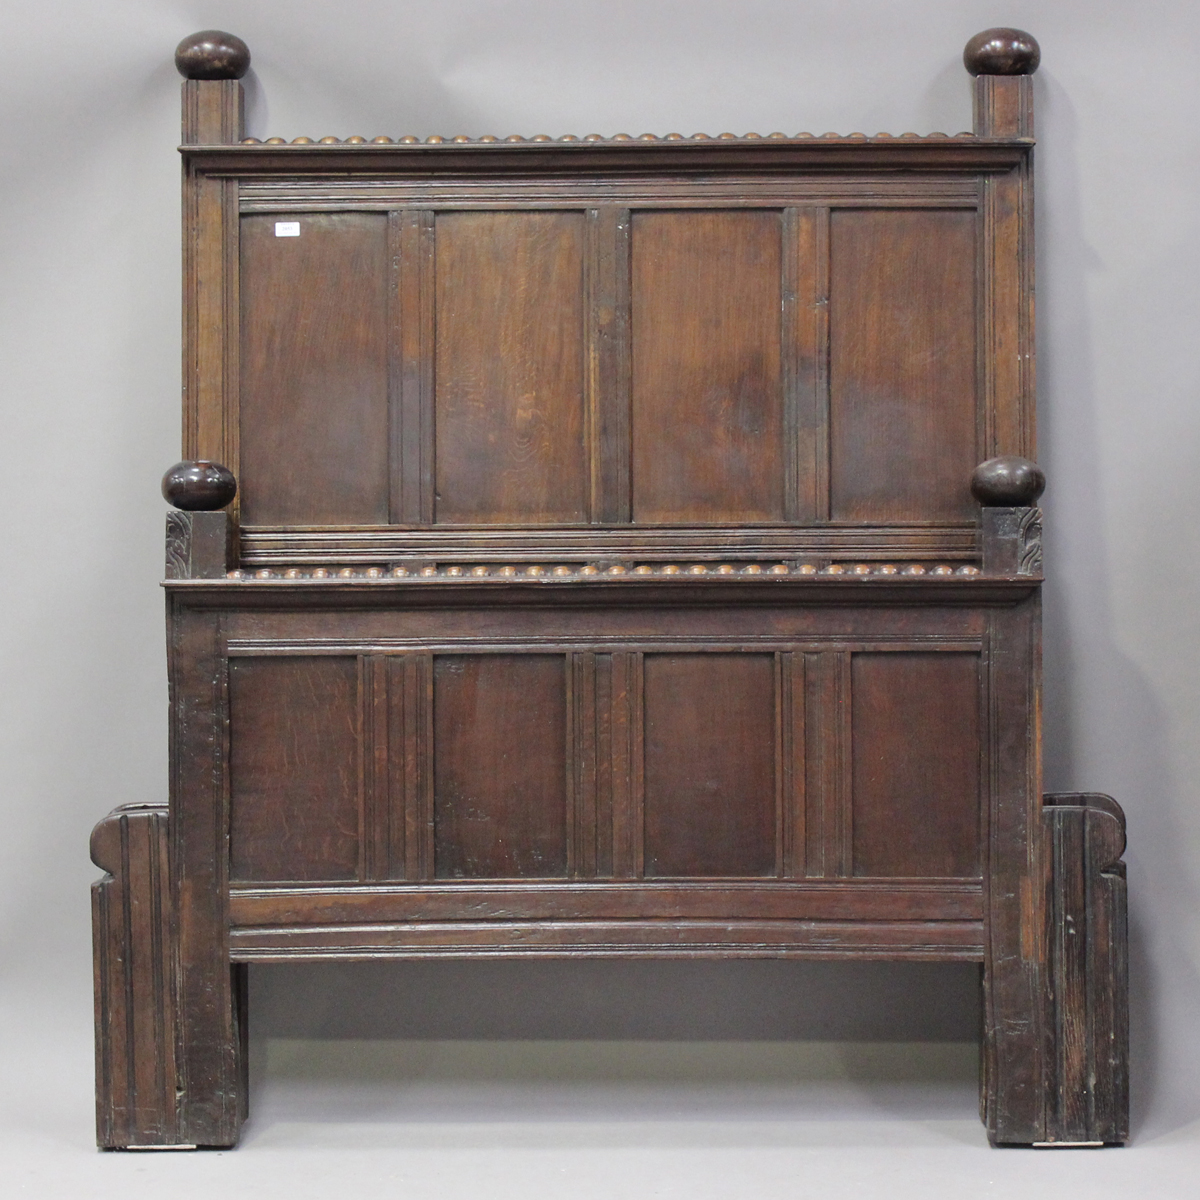 A 20th century oak panelled double bed frame, formed from 18th century oak panelling, height